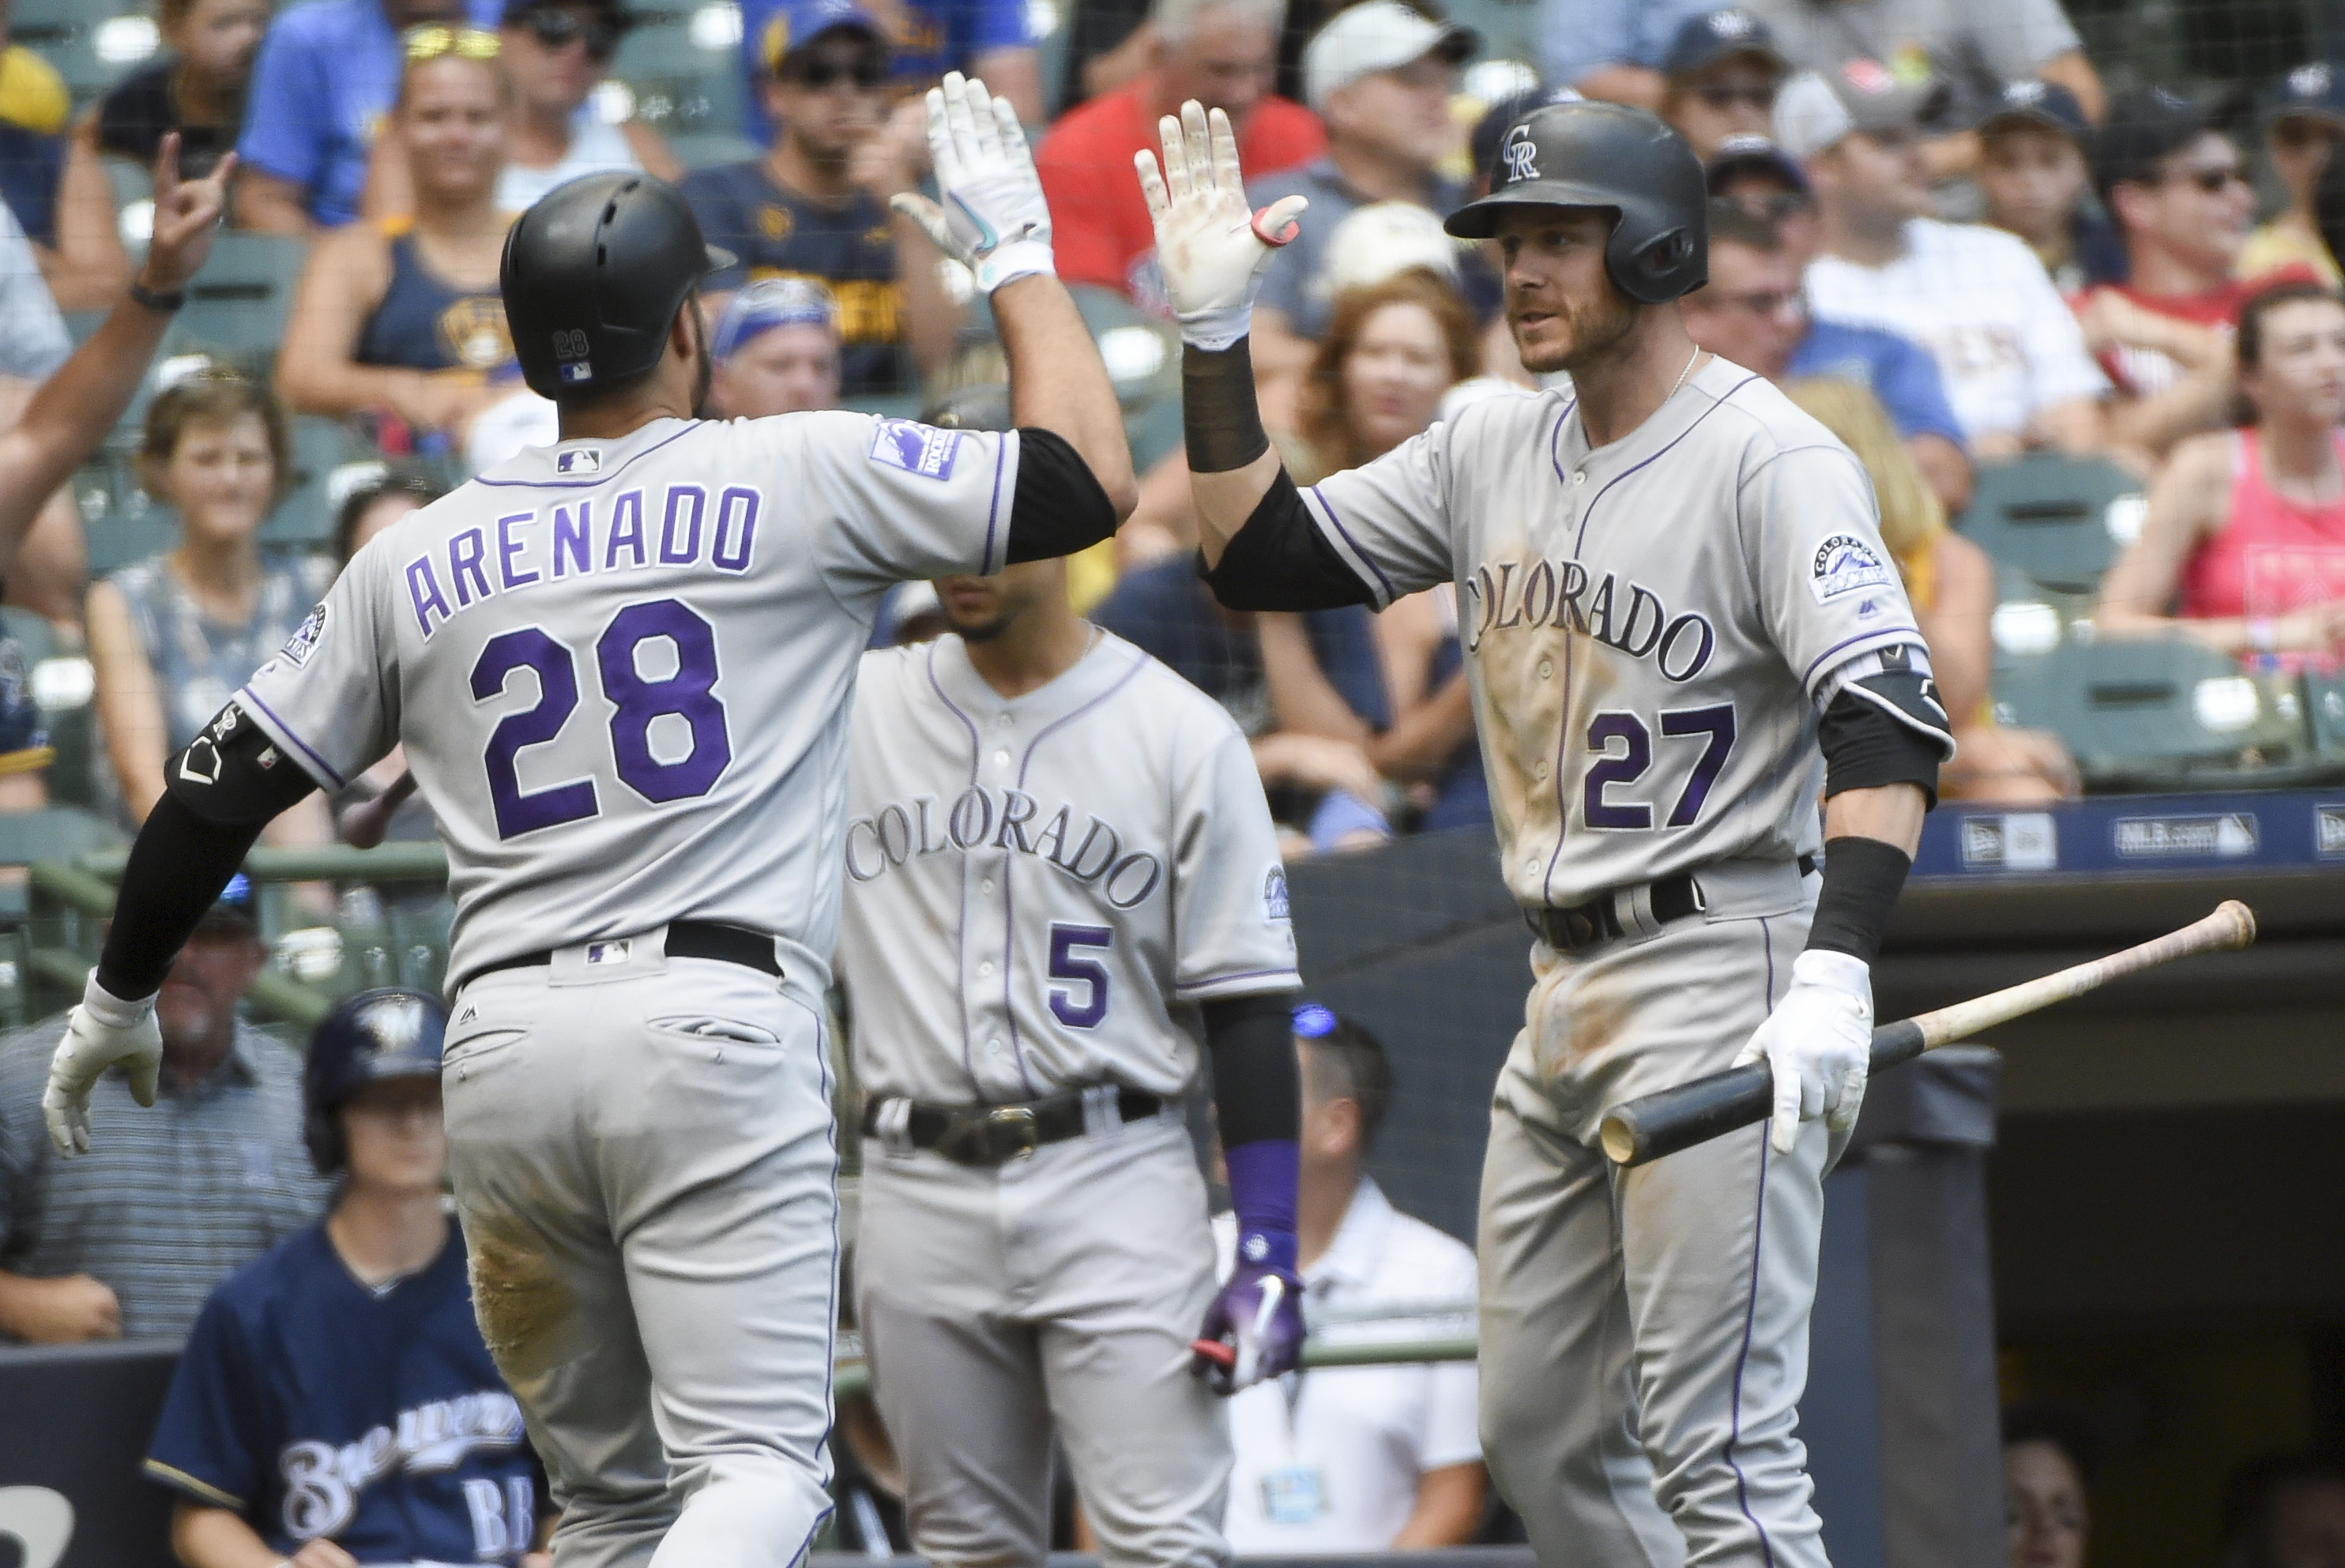 Colorado Rockies third baseman Nolan Arenado (28) is greeted by shortstop Trevor Story (27) after hitting a solo home run in the eleventh inning against the Milwaukee Brewers at Miller Park.